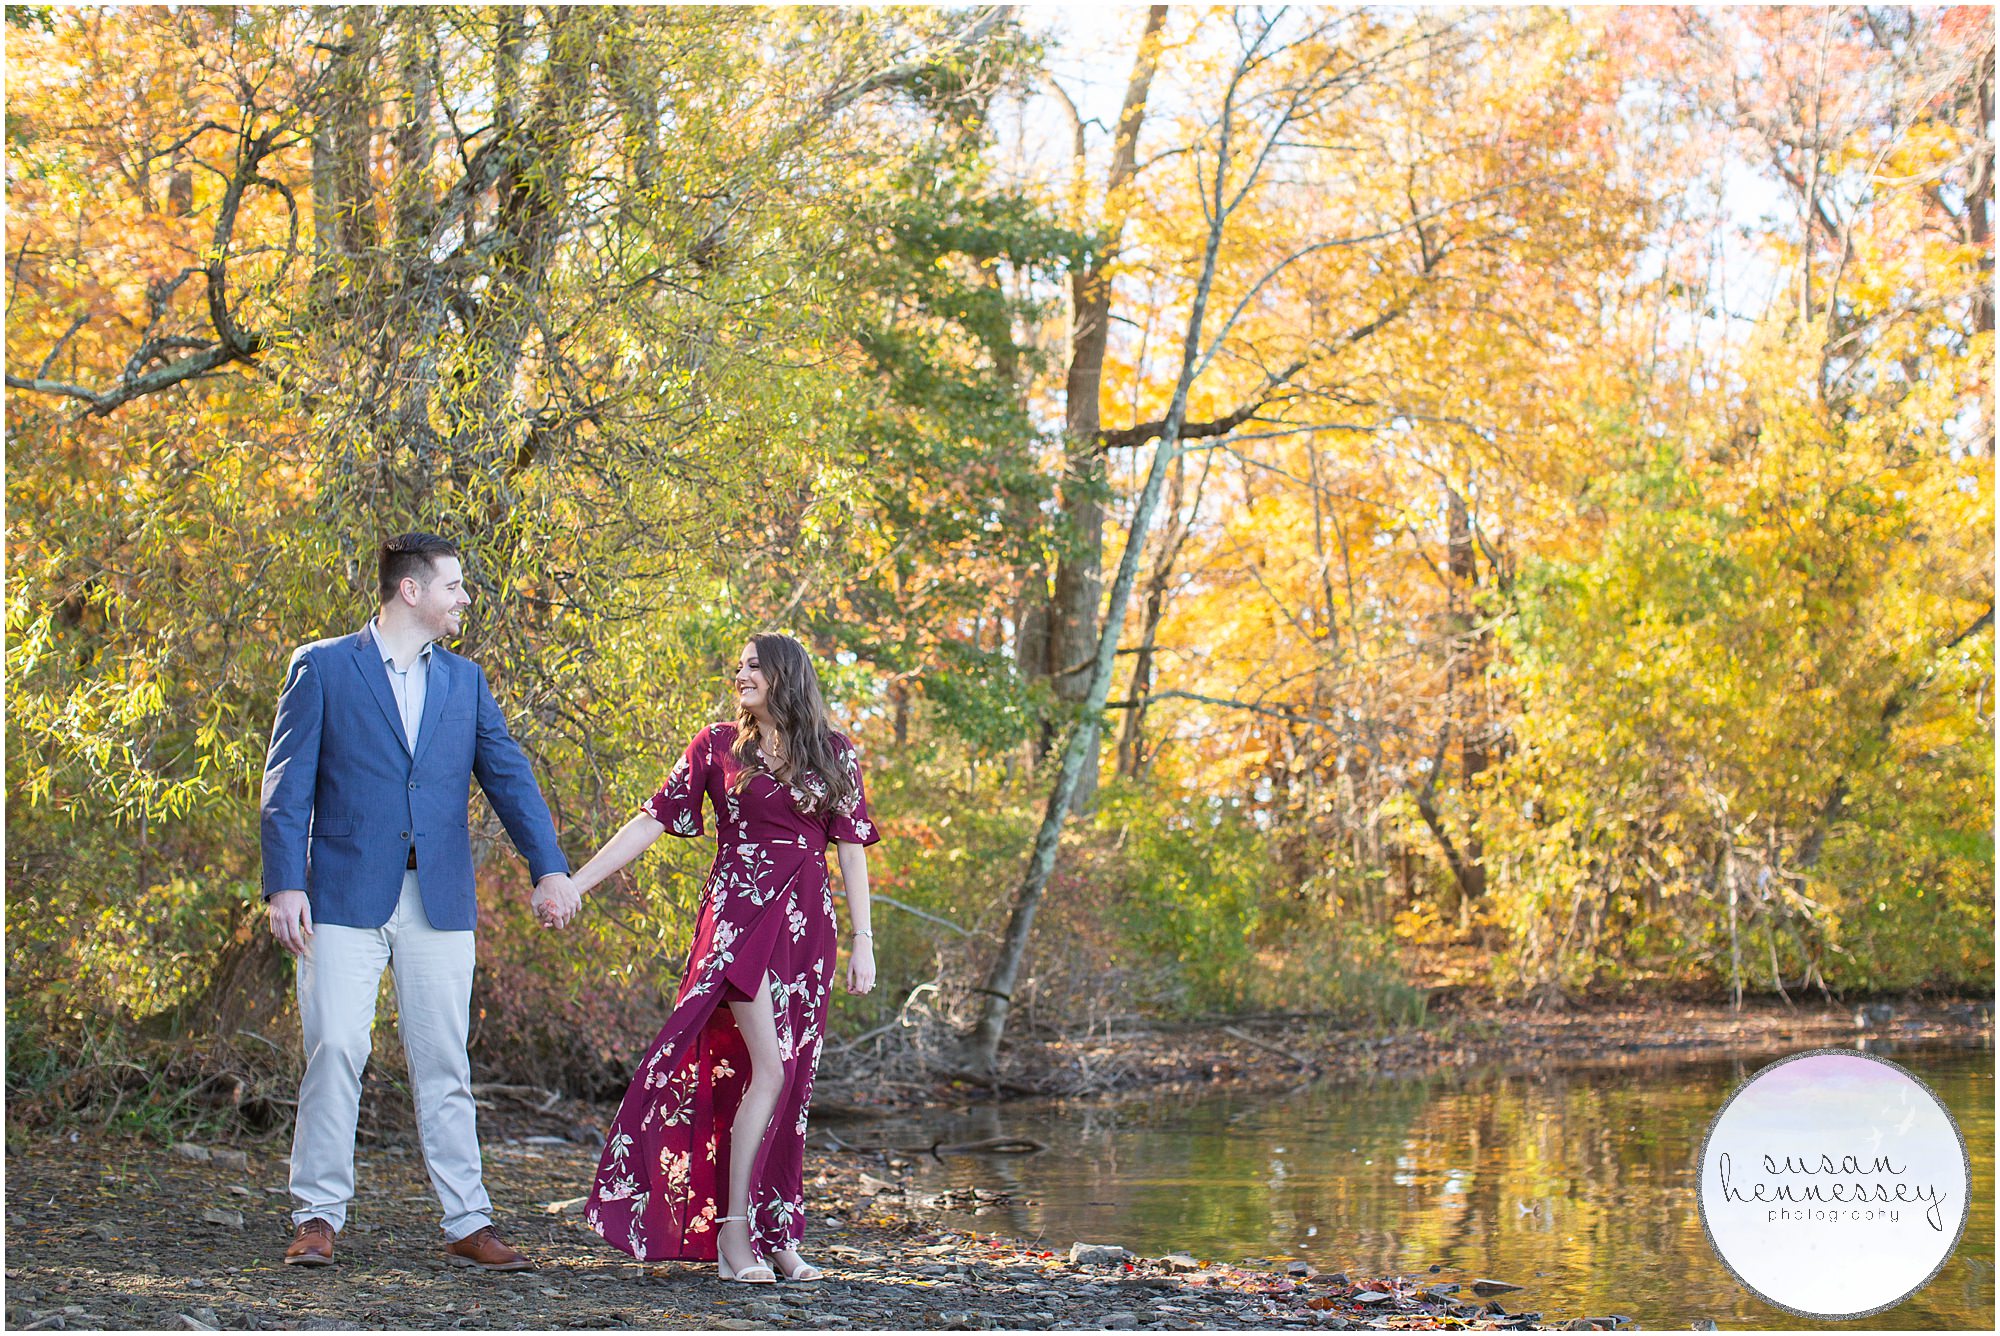 A Fall engagement session in Pennsylvania